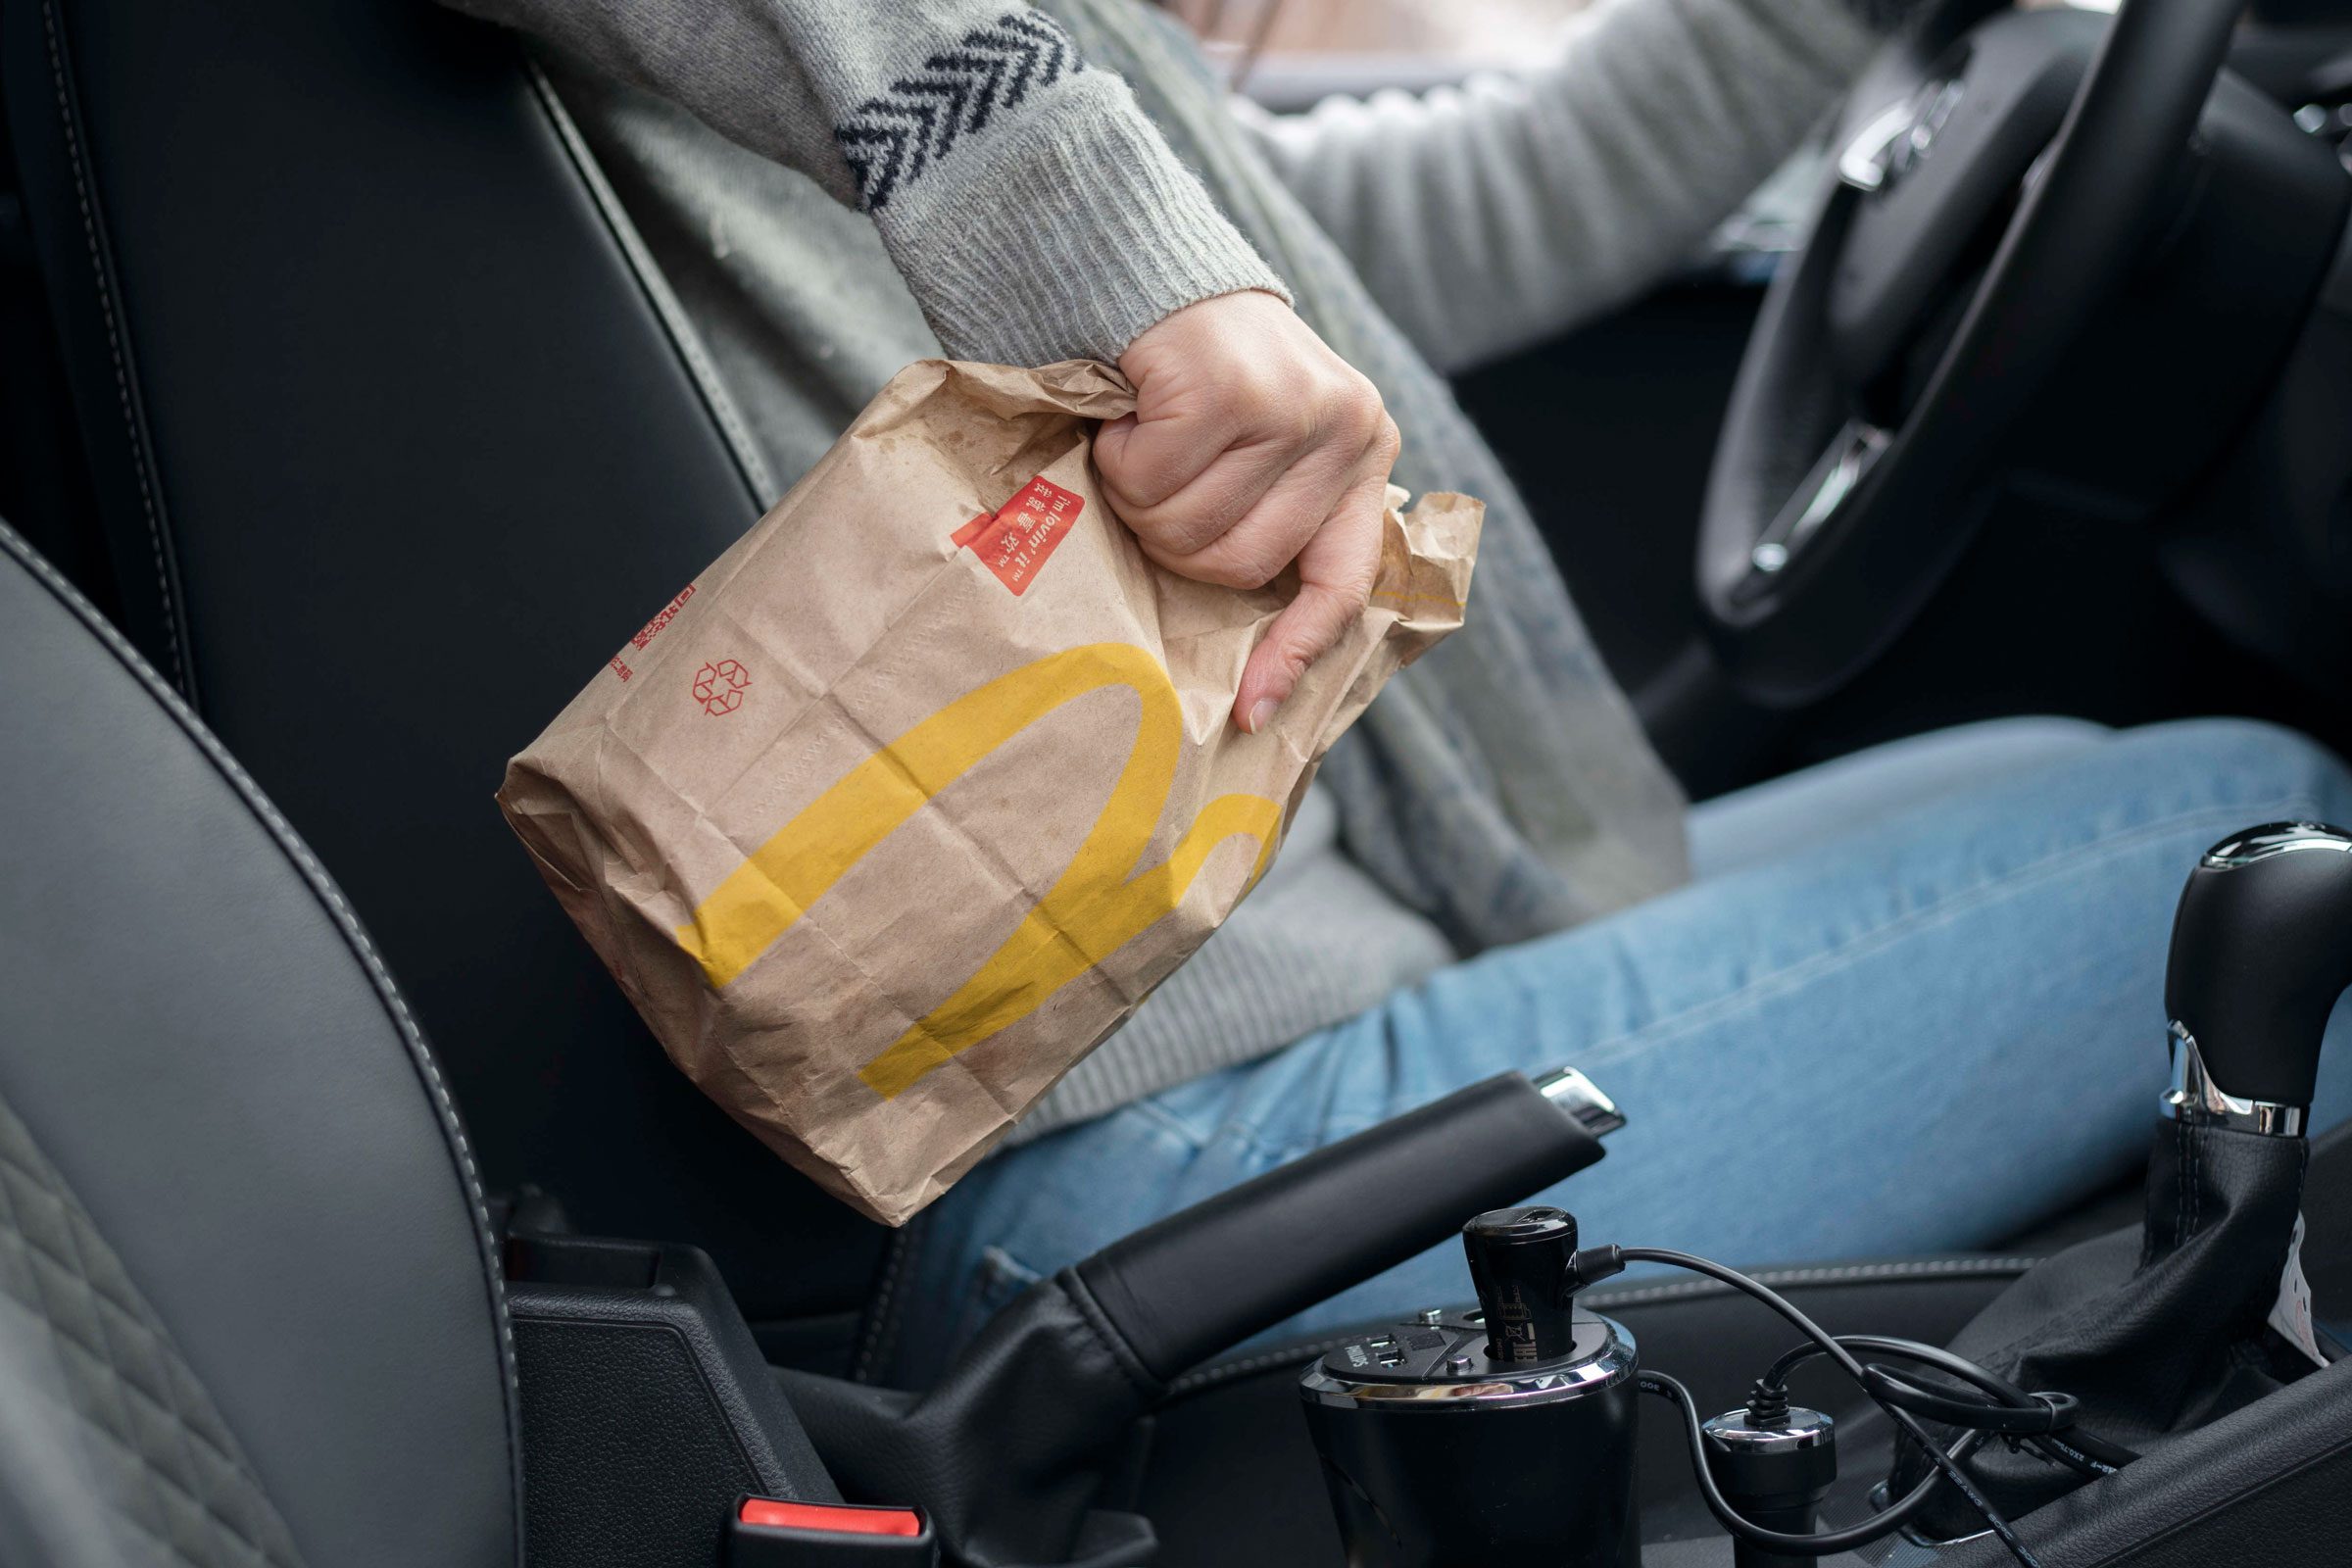 A customer bought food from a McDonald's Drive-Thru...